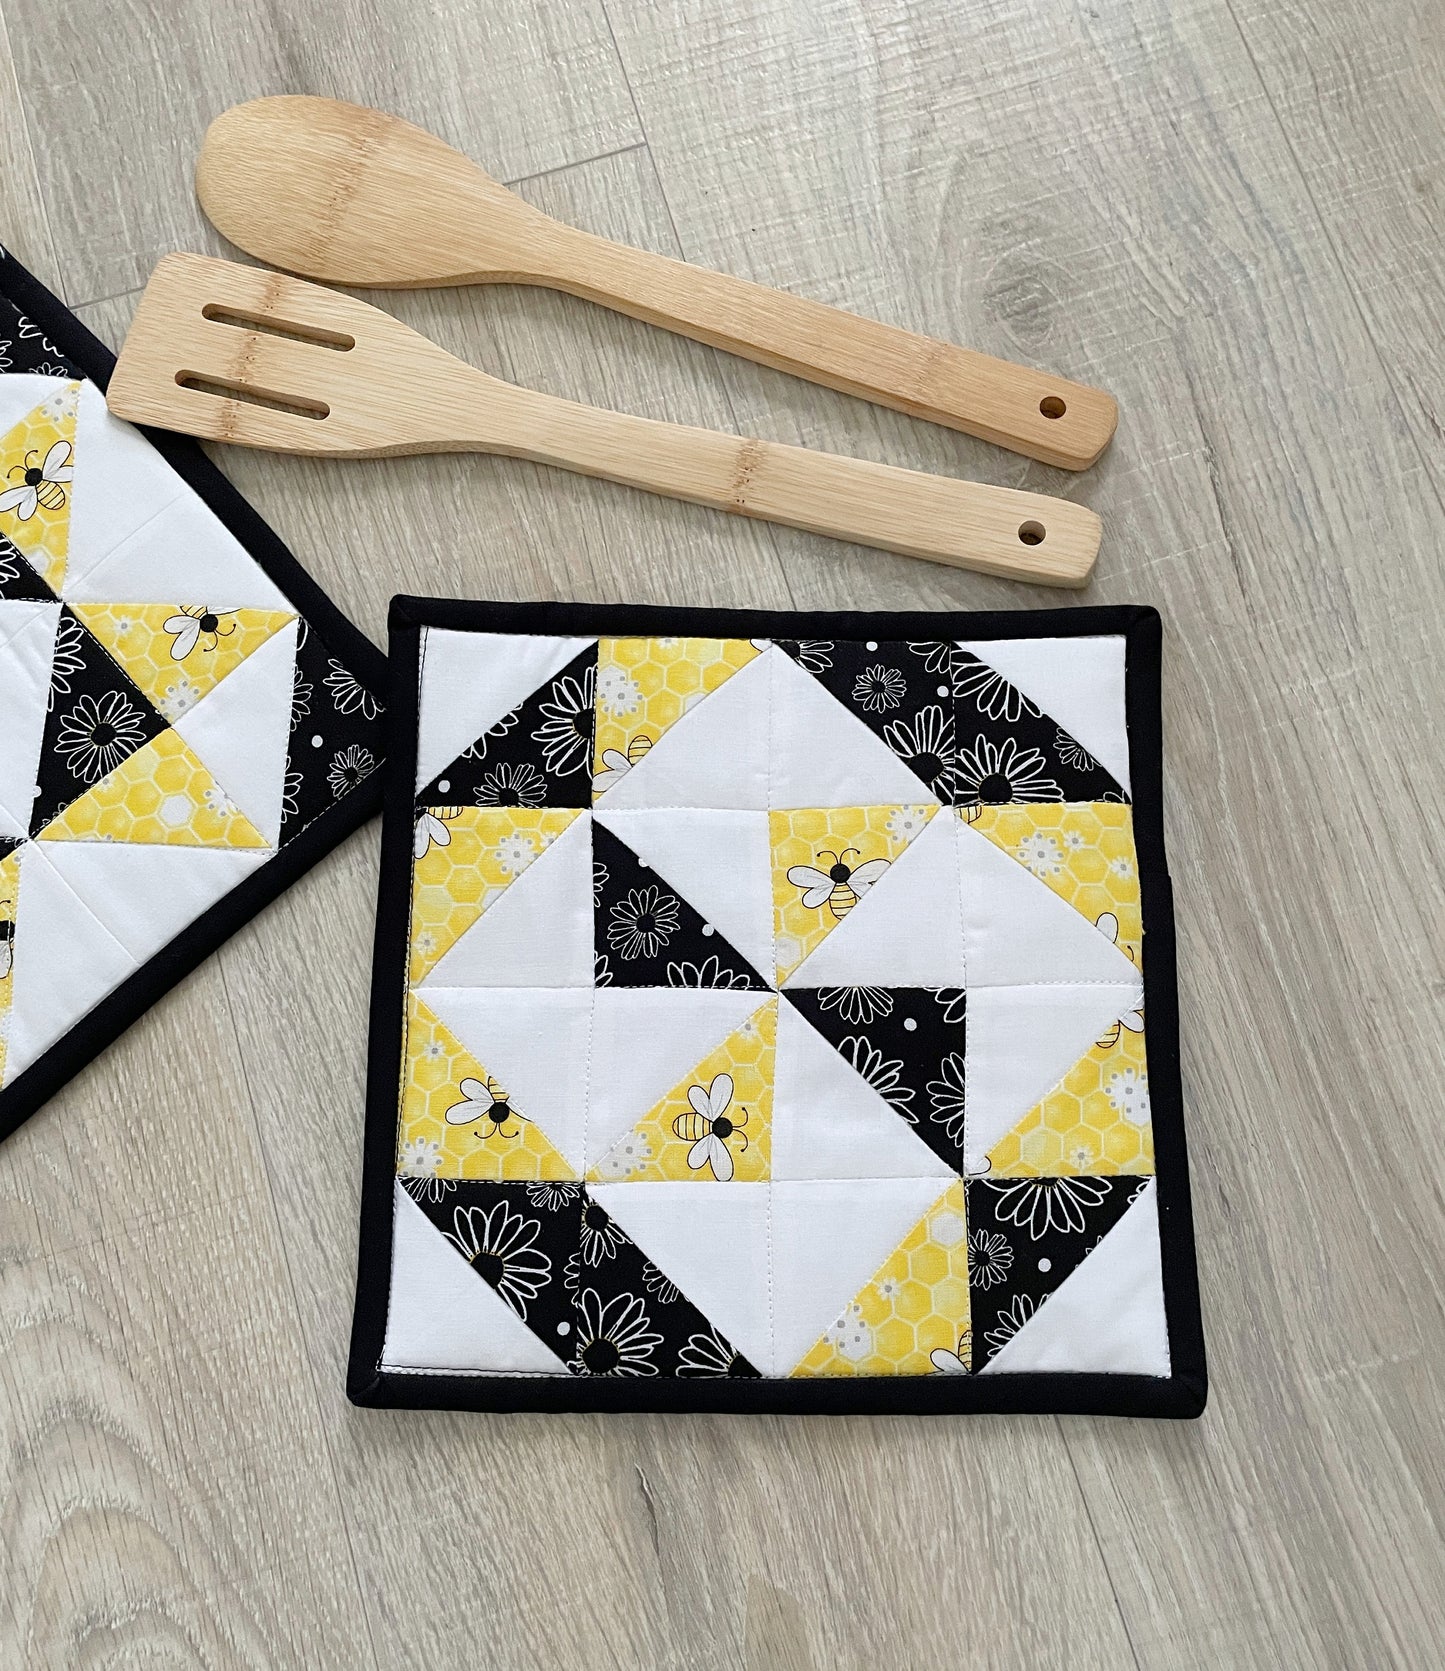 Set of 2 Quilted Potholders in Black and Yellow Bumble Bee - Kitchen Decor